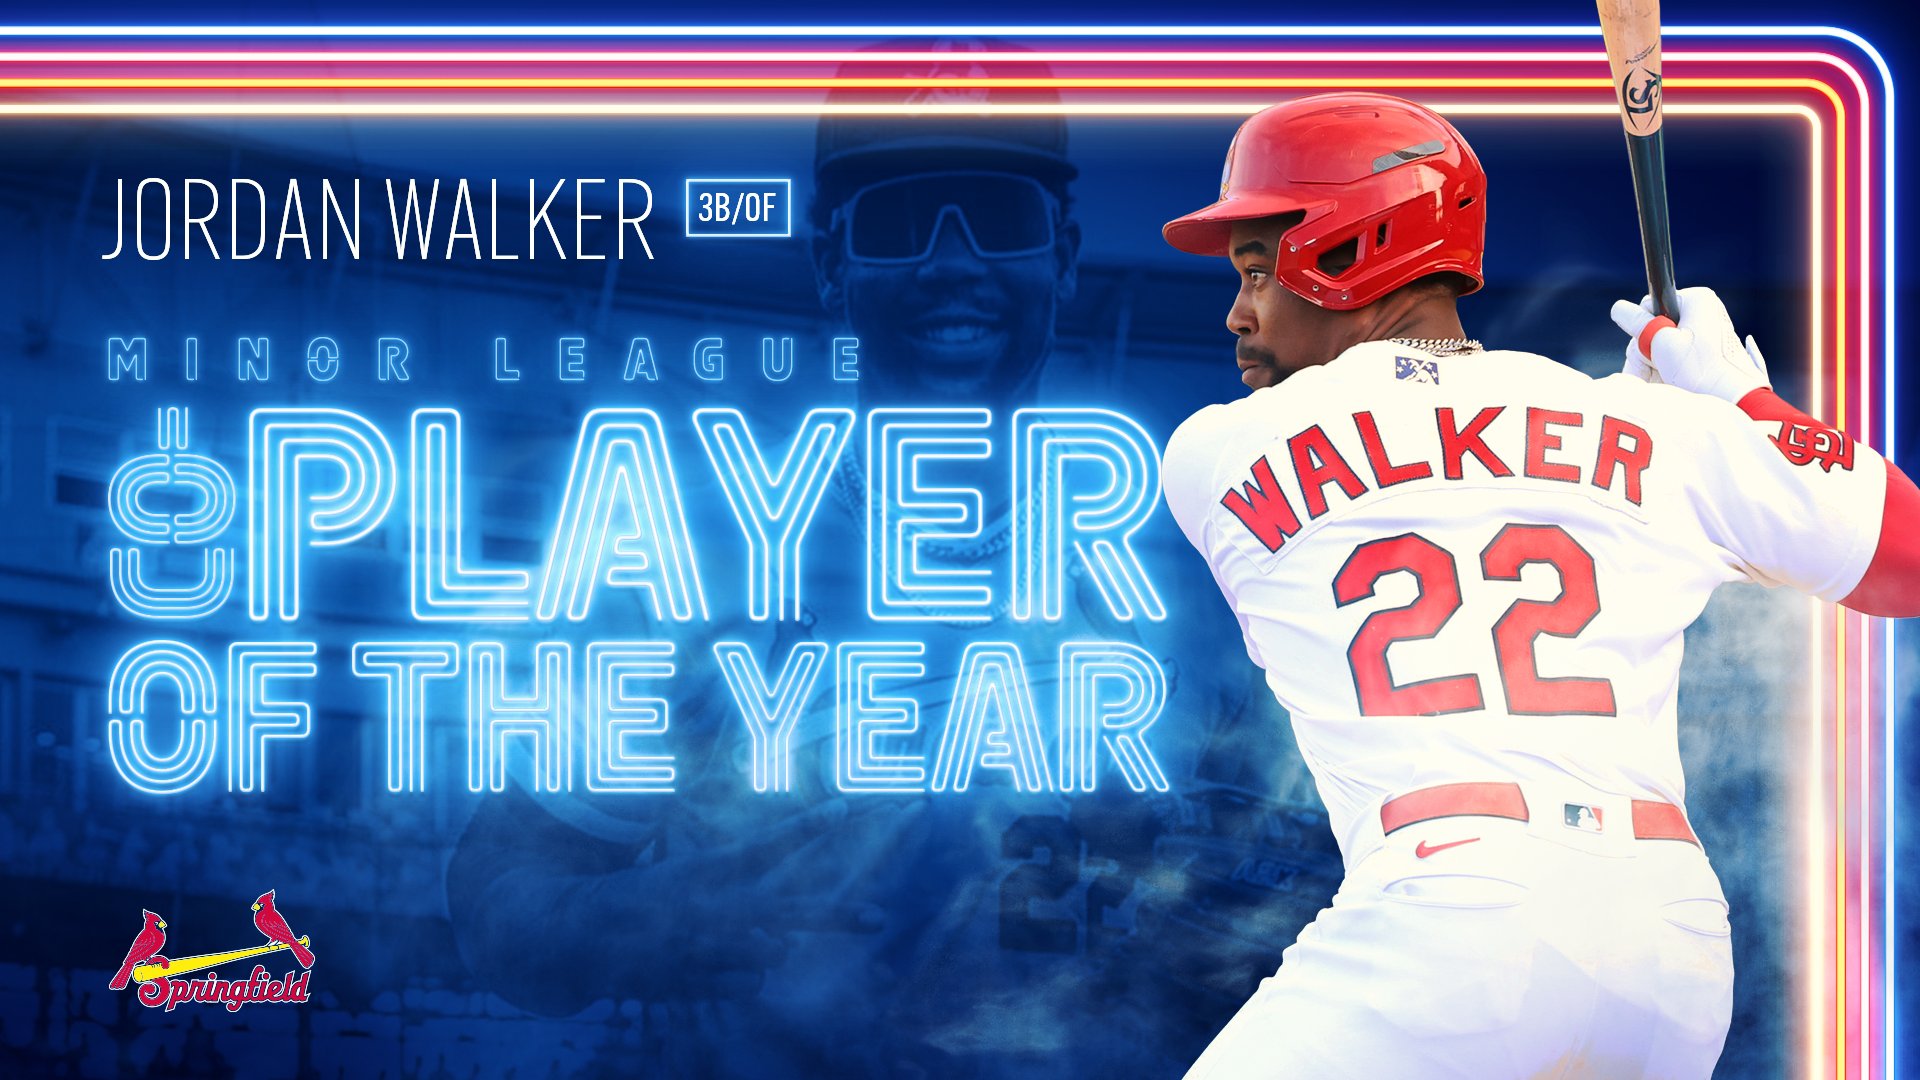 Graphic with a photo of Jordan Walker and text reading: Jordan Walker 3B/OF Minor League Player of the Year